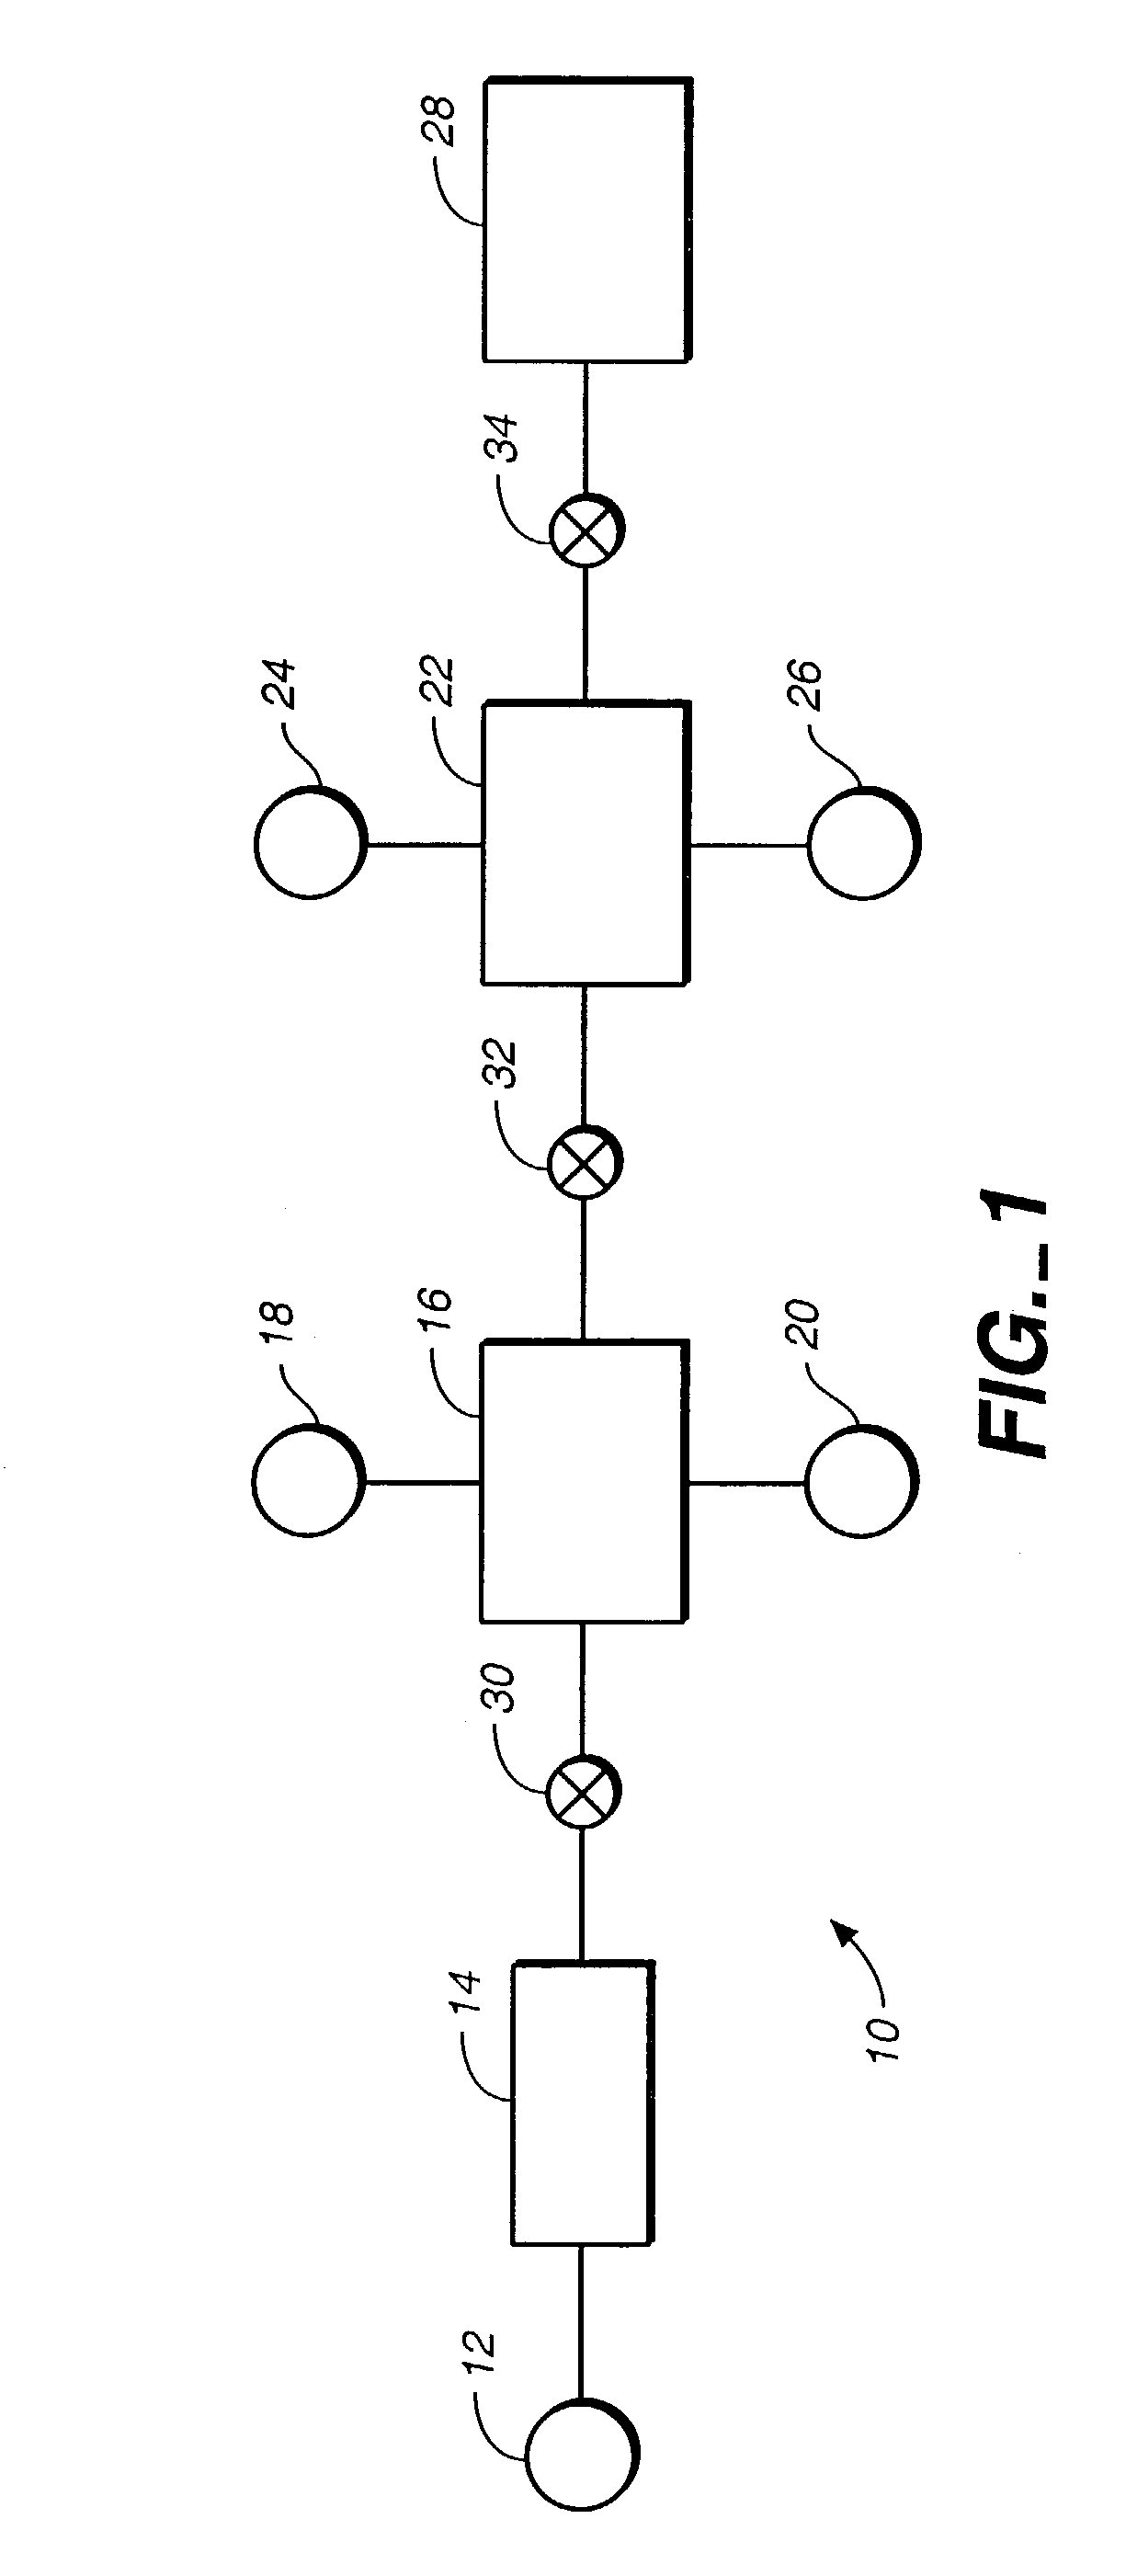 Multilayered microfluidic DNA analysis system and method